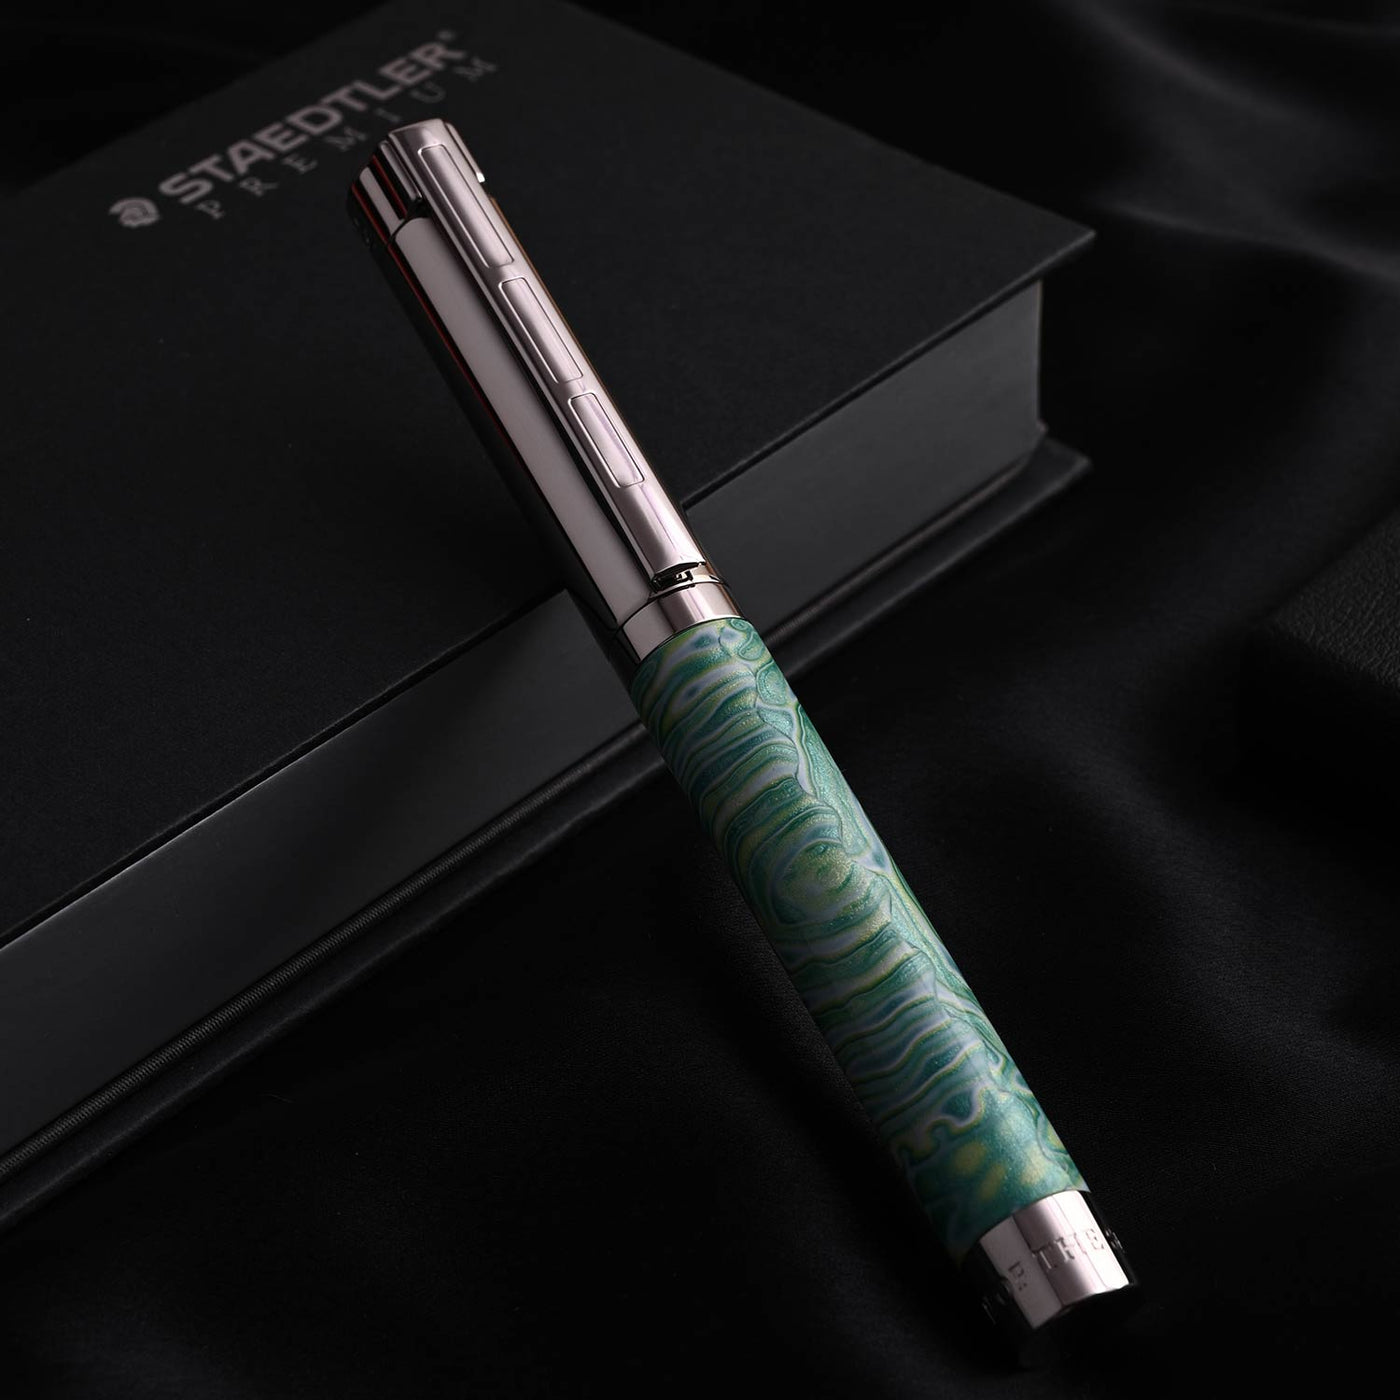 Staedtler Premium Pen of the Season Fountain Pen - Green CT (Limited Edition)